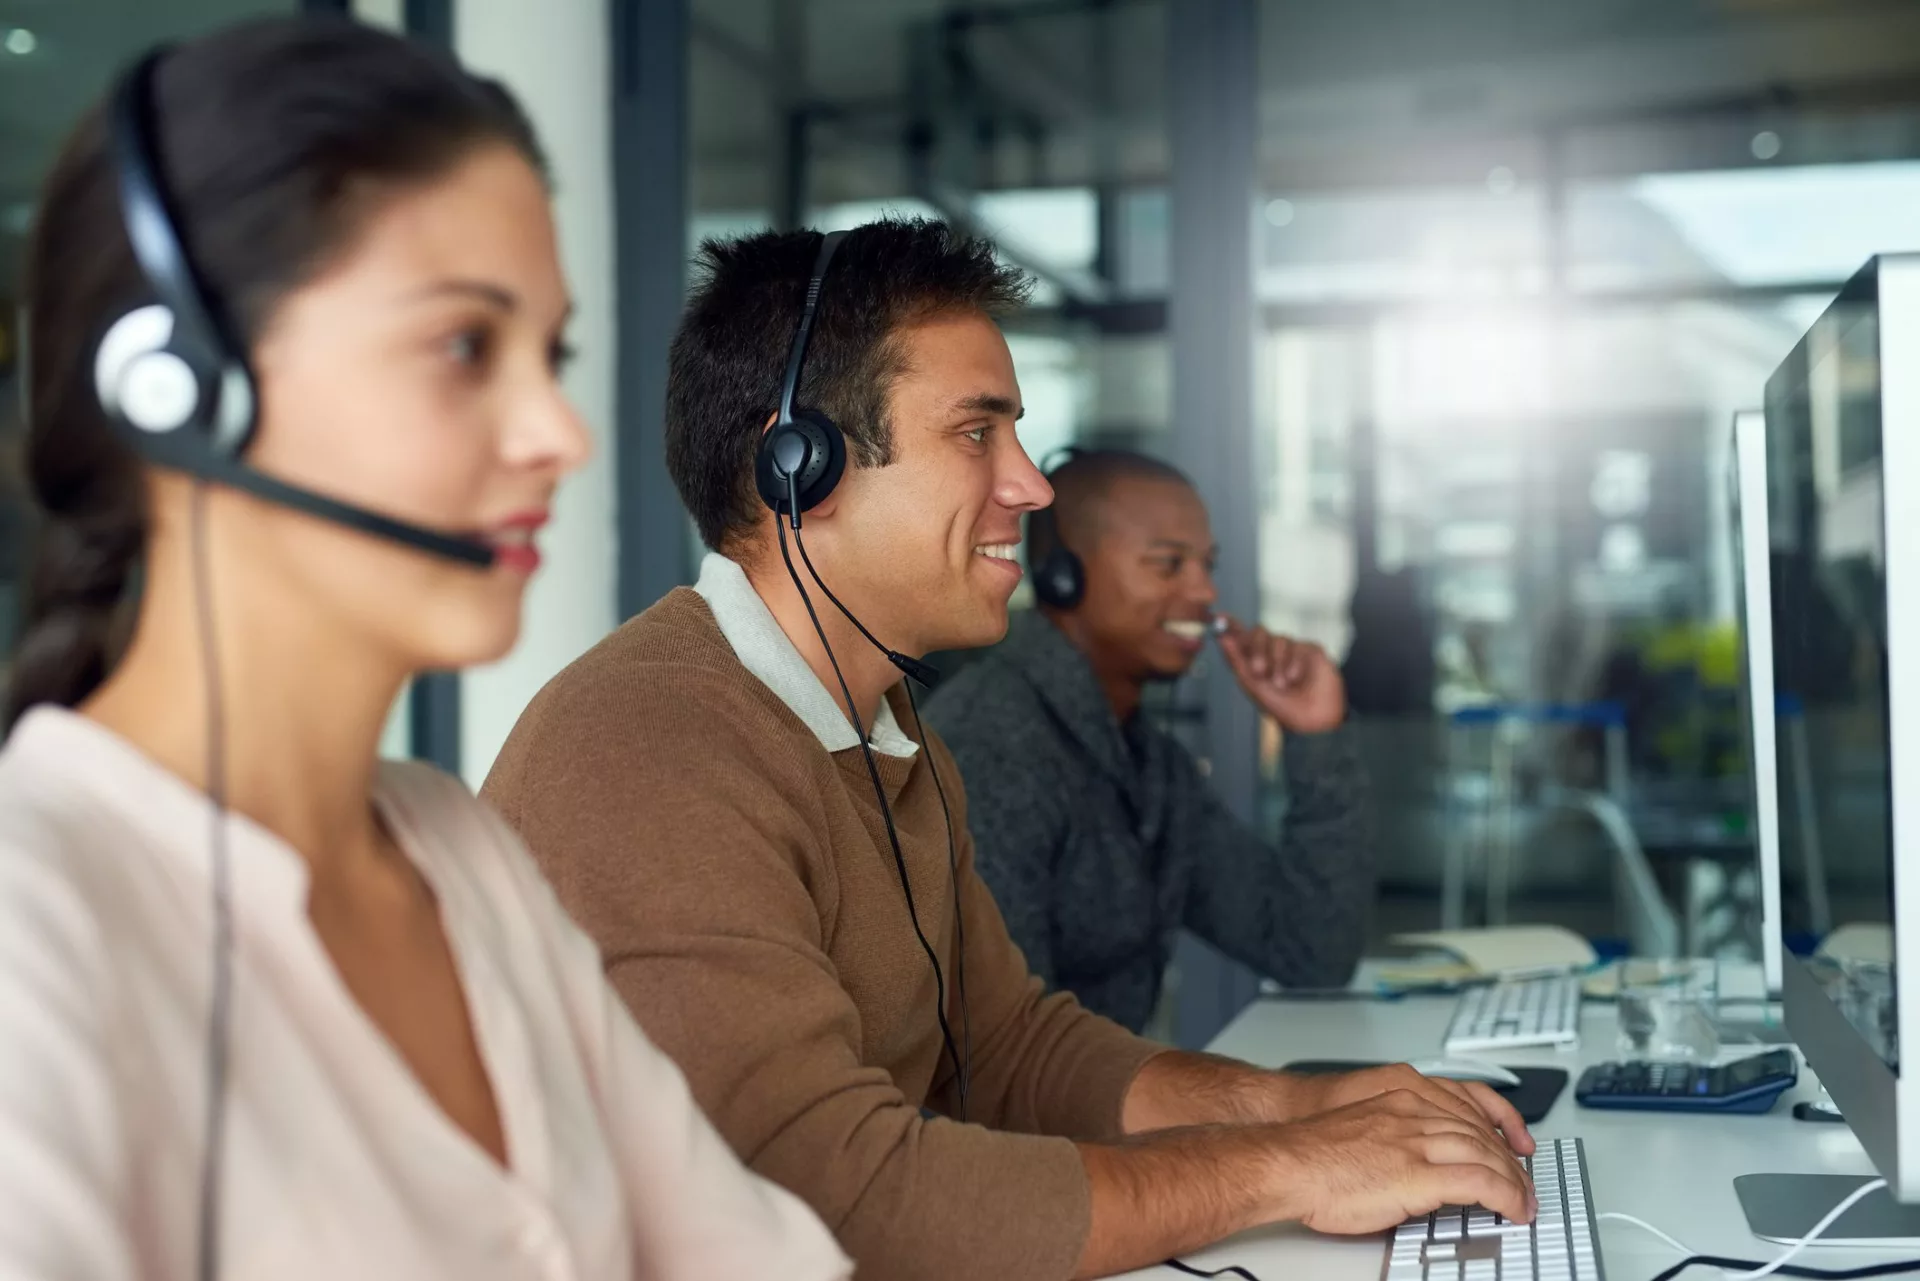 Call center employees at computers demonstrate employee engagement in customer service